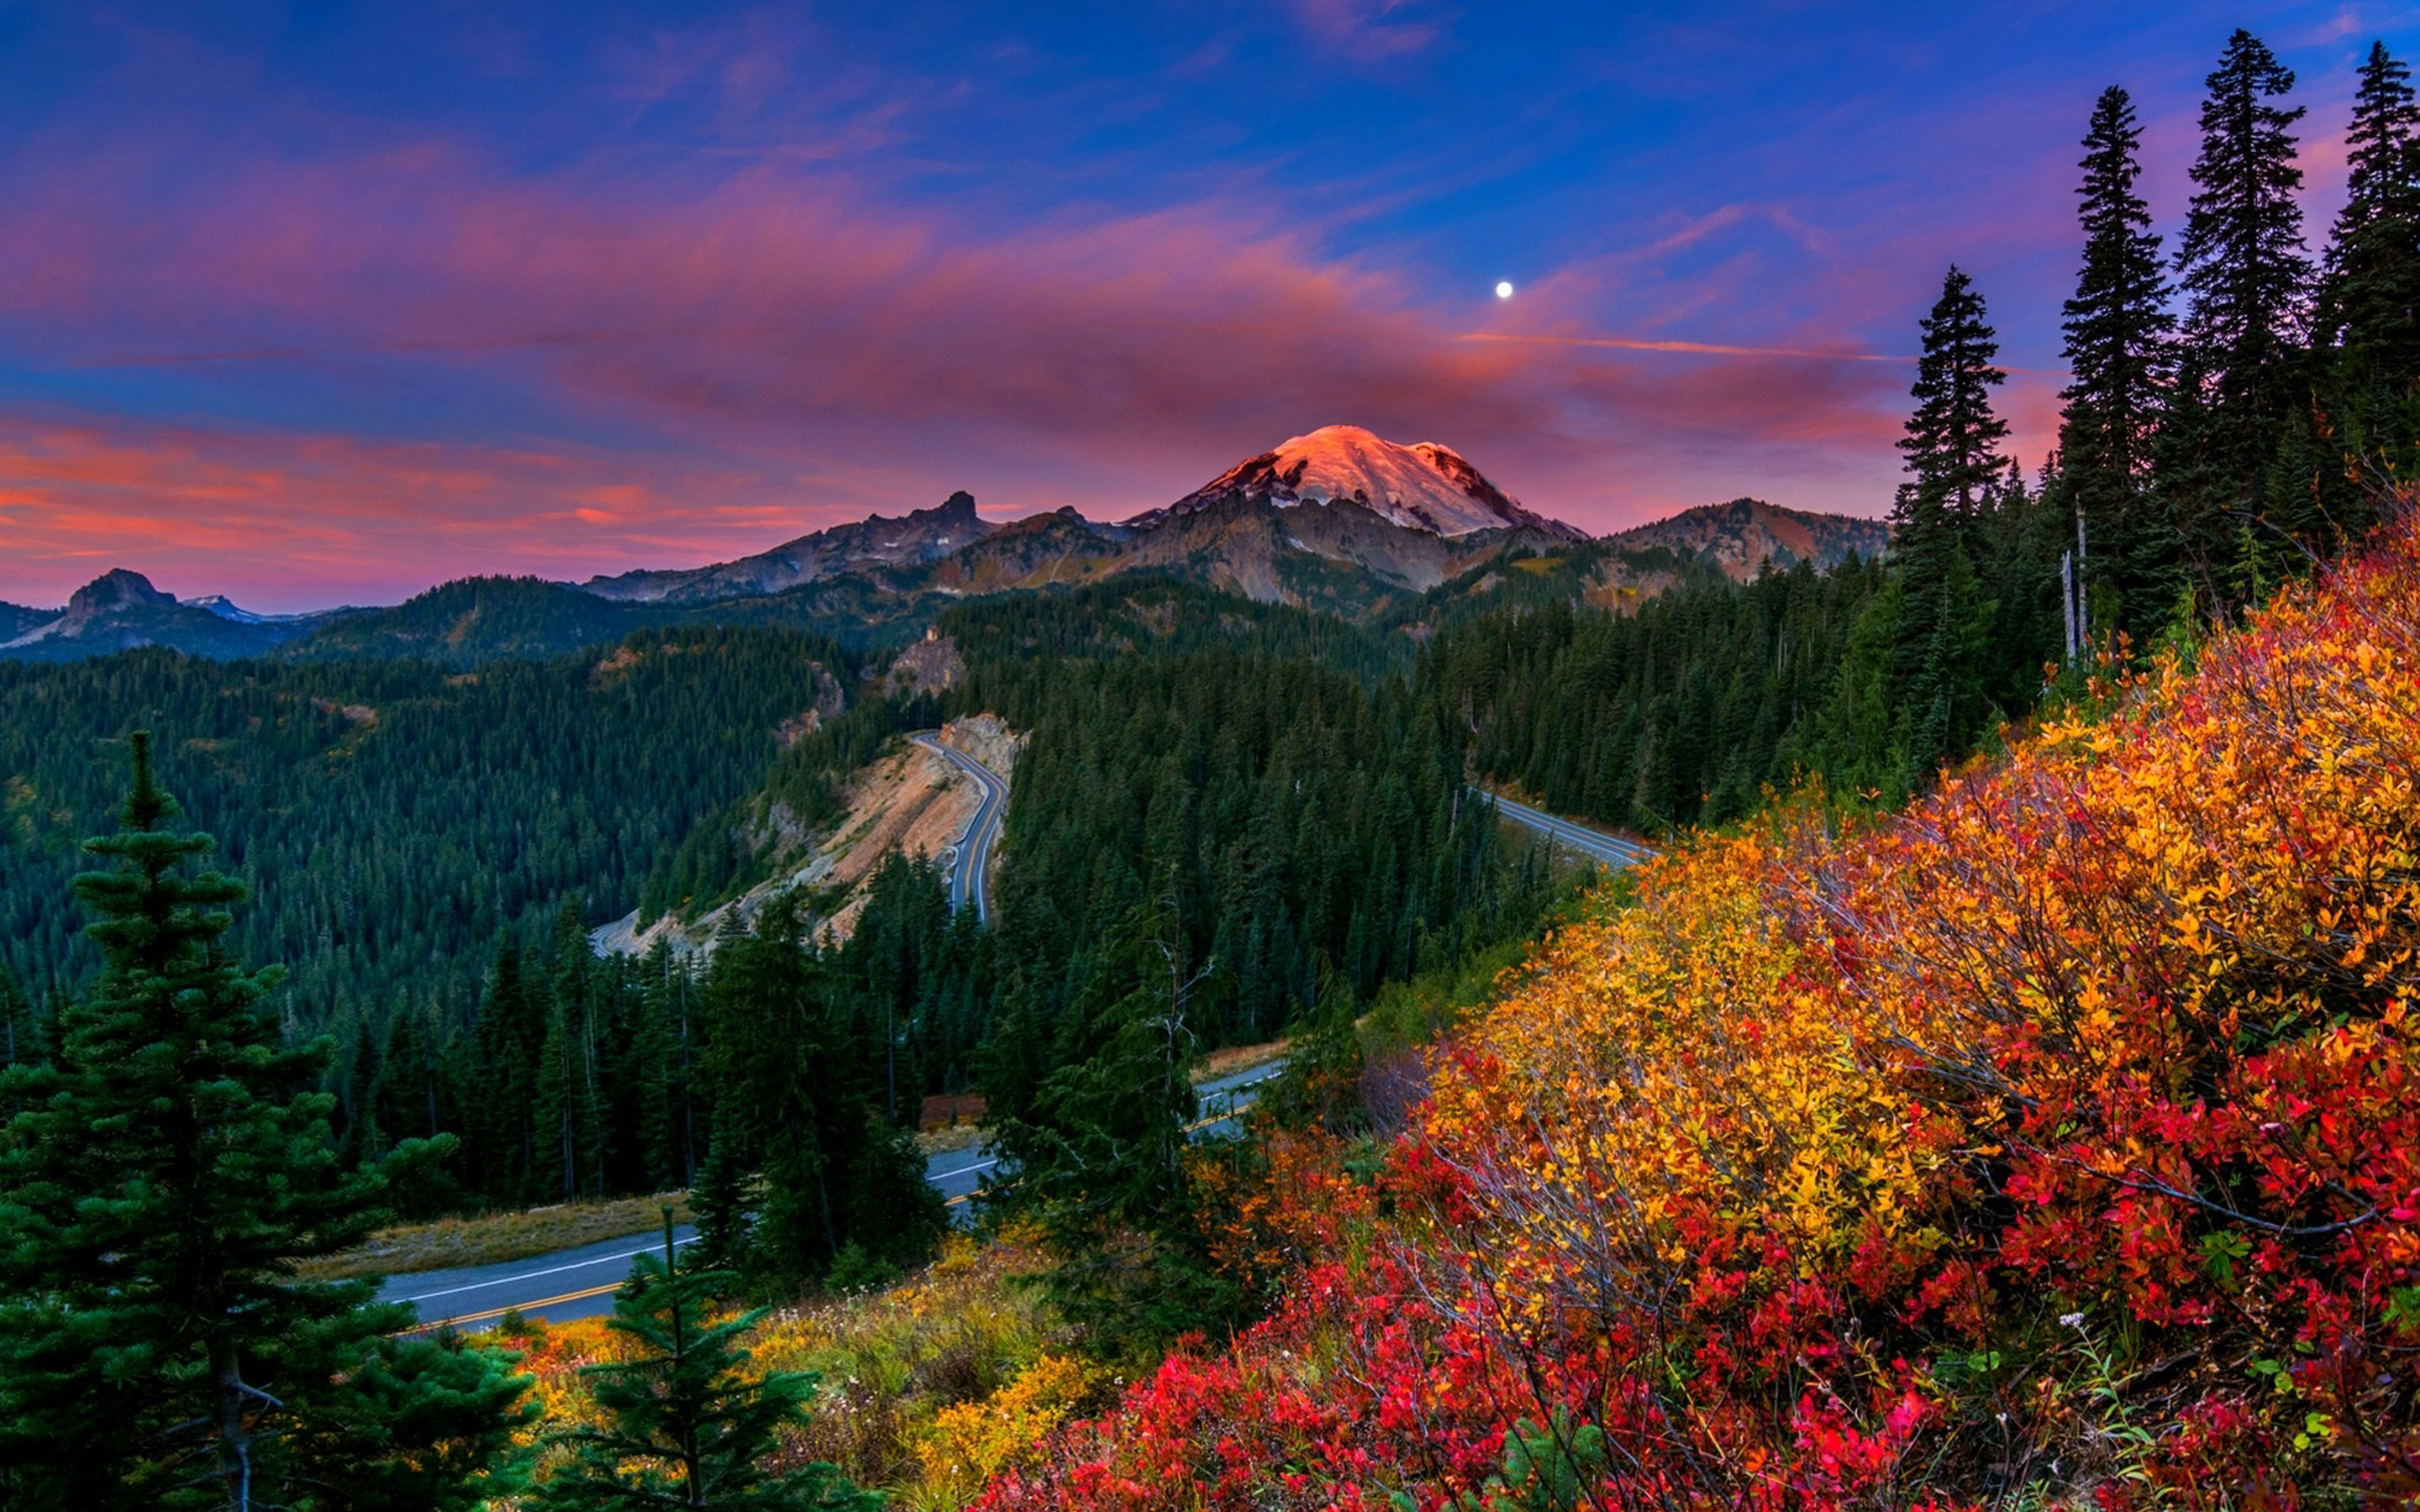 http://www.wallpapers13.com/wp-content/uploads/2016/03/Autumn-landscape-bushes-with-yellow-and-red-leaves-mountainous-peak-snow-pine-forest-red-cloud-moon.jpg